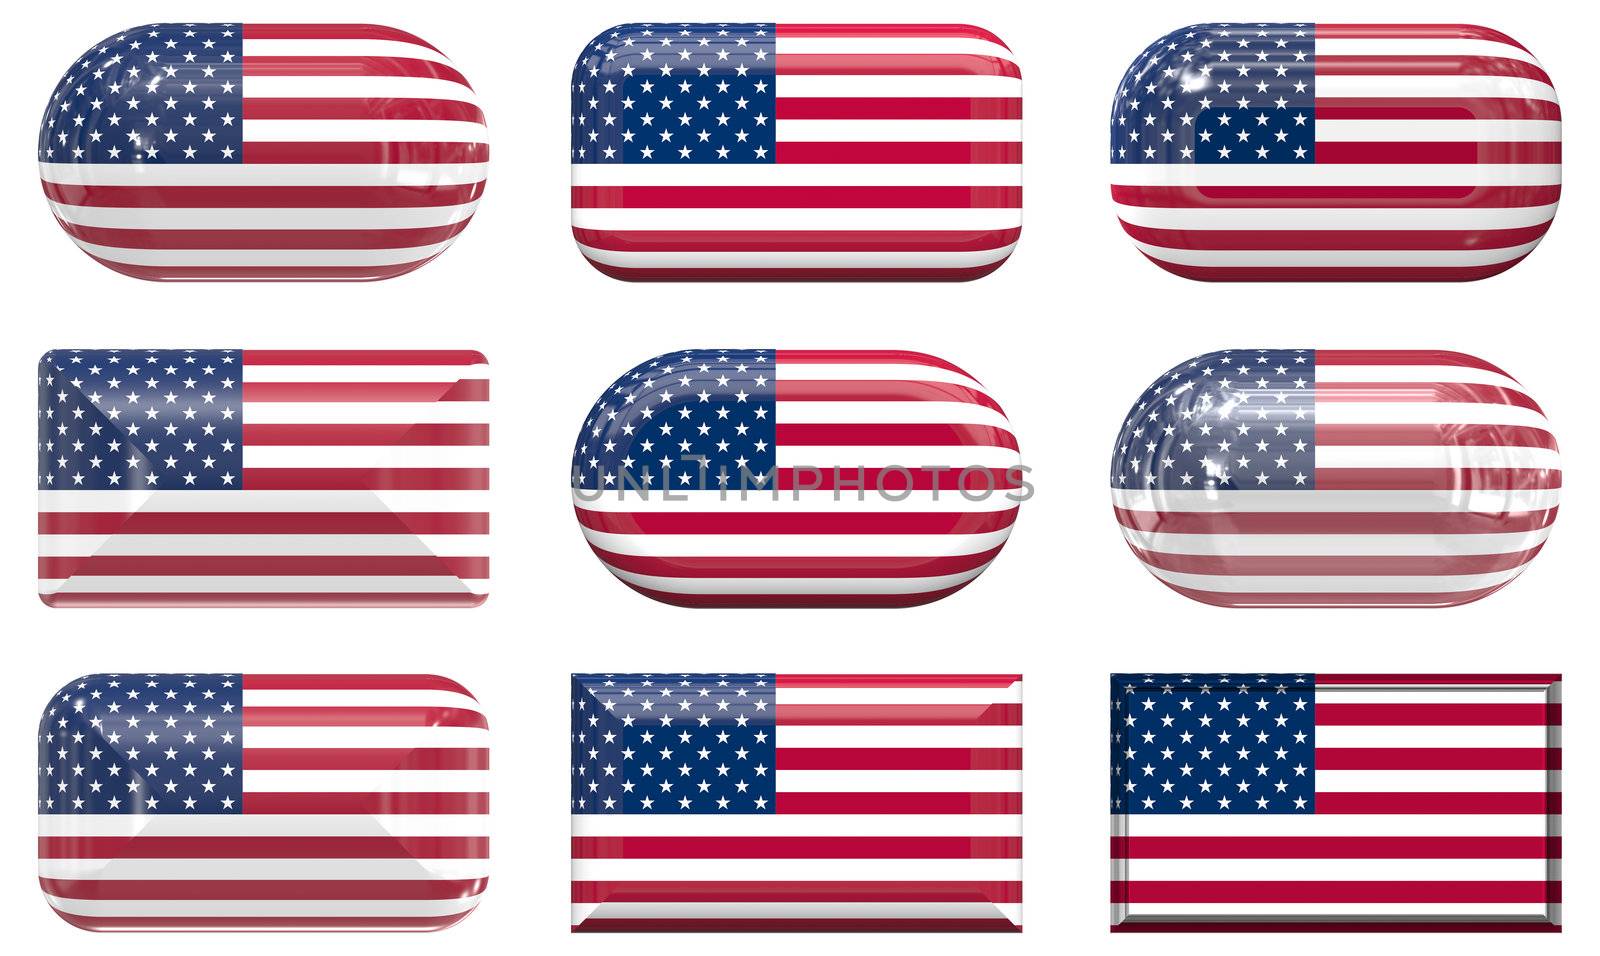 nine glass buttons of the Flag of the United States by clearviewstock